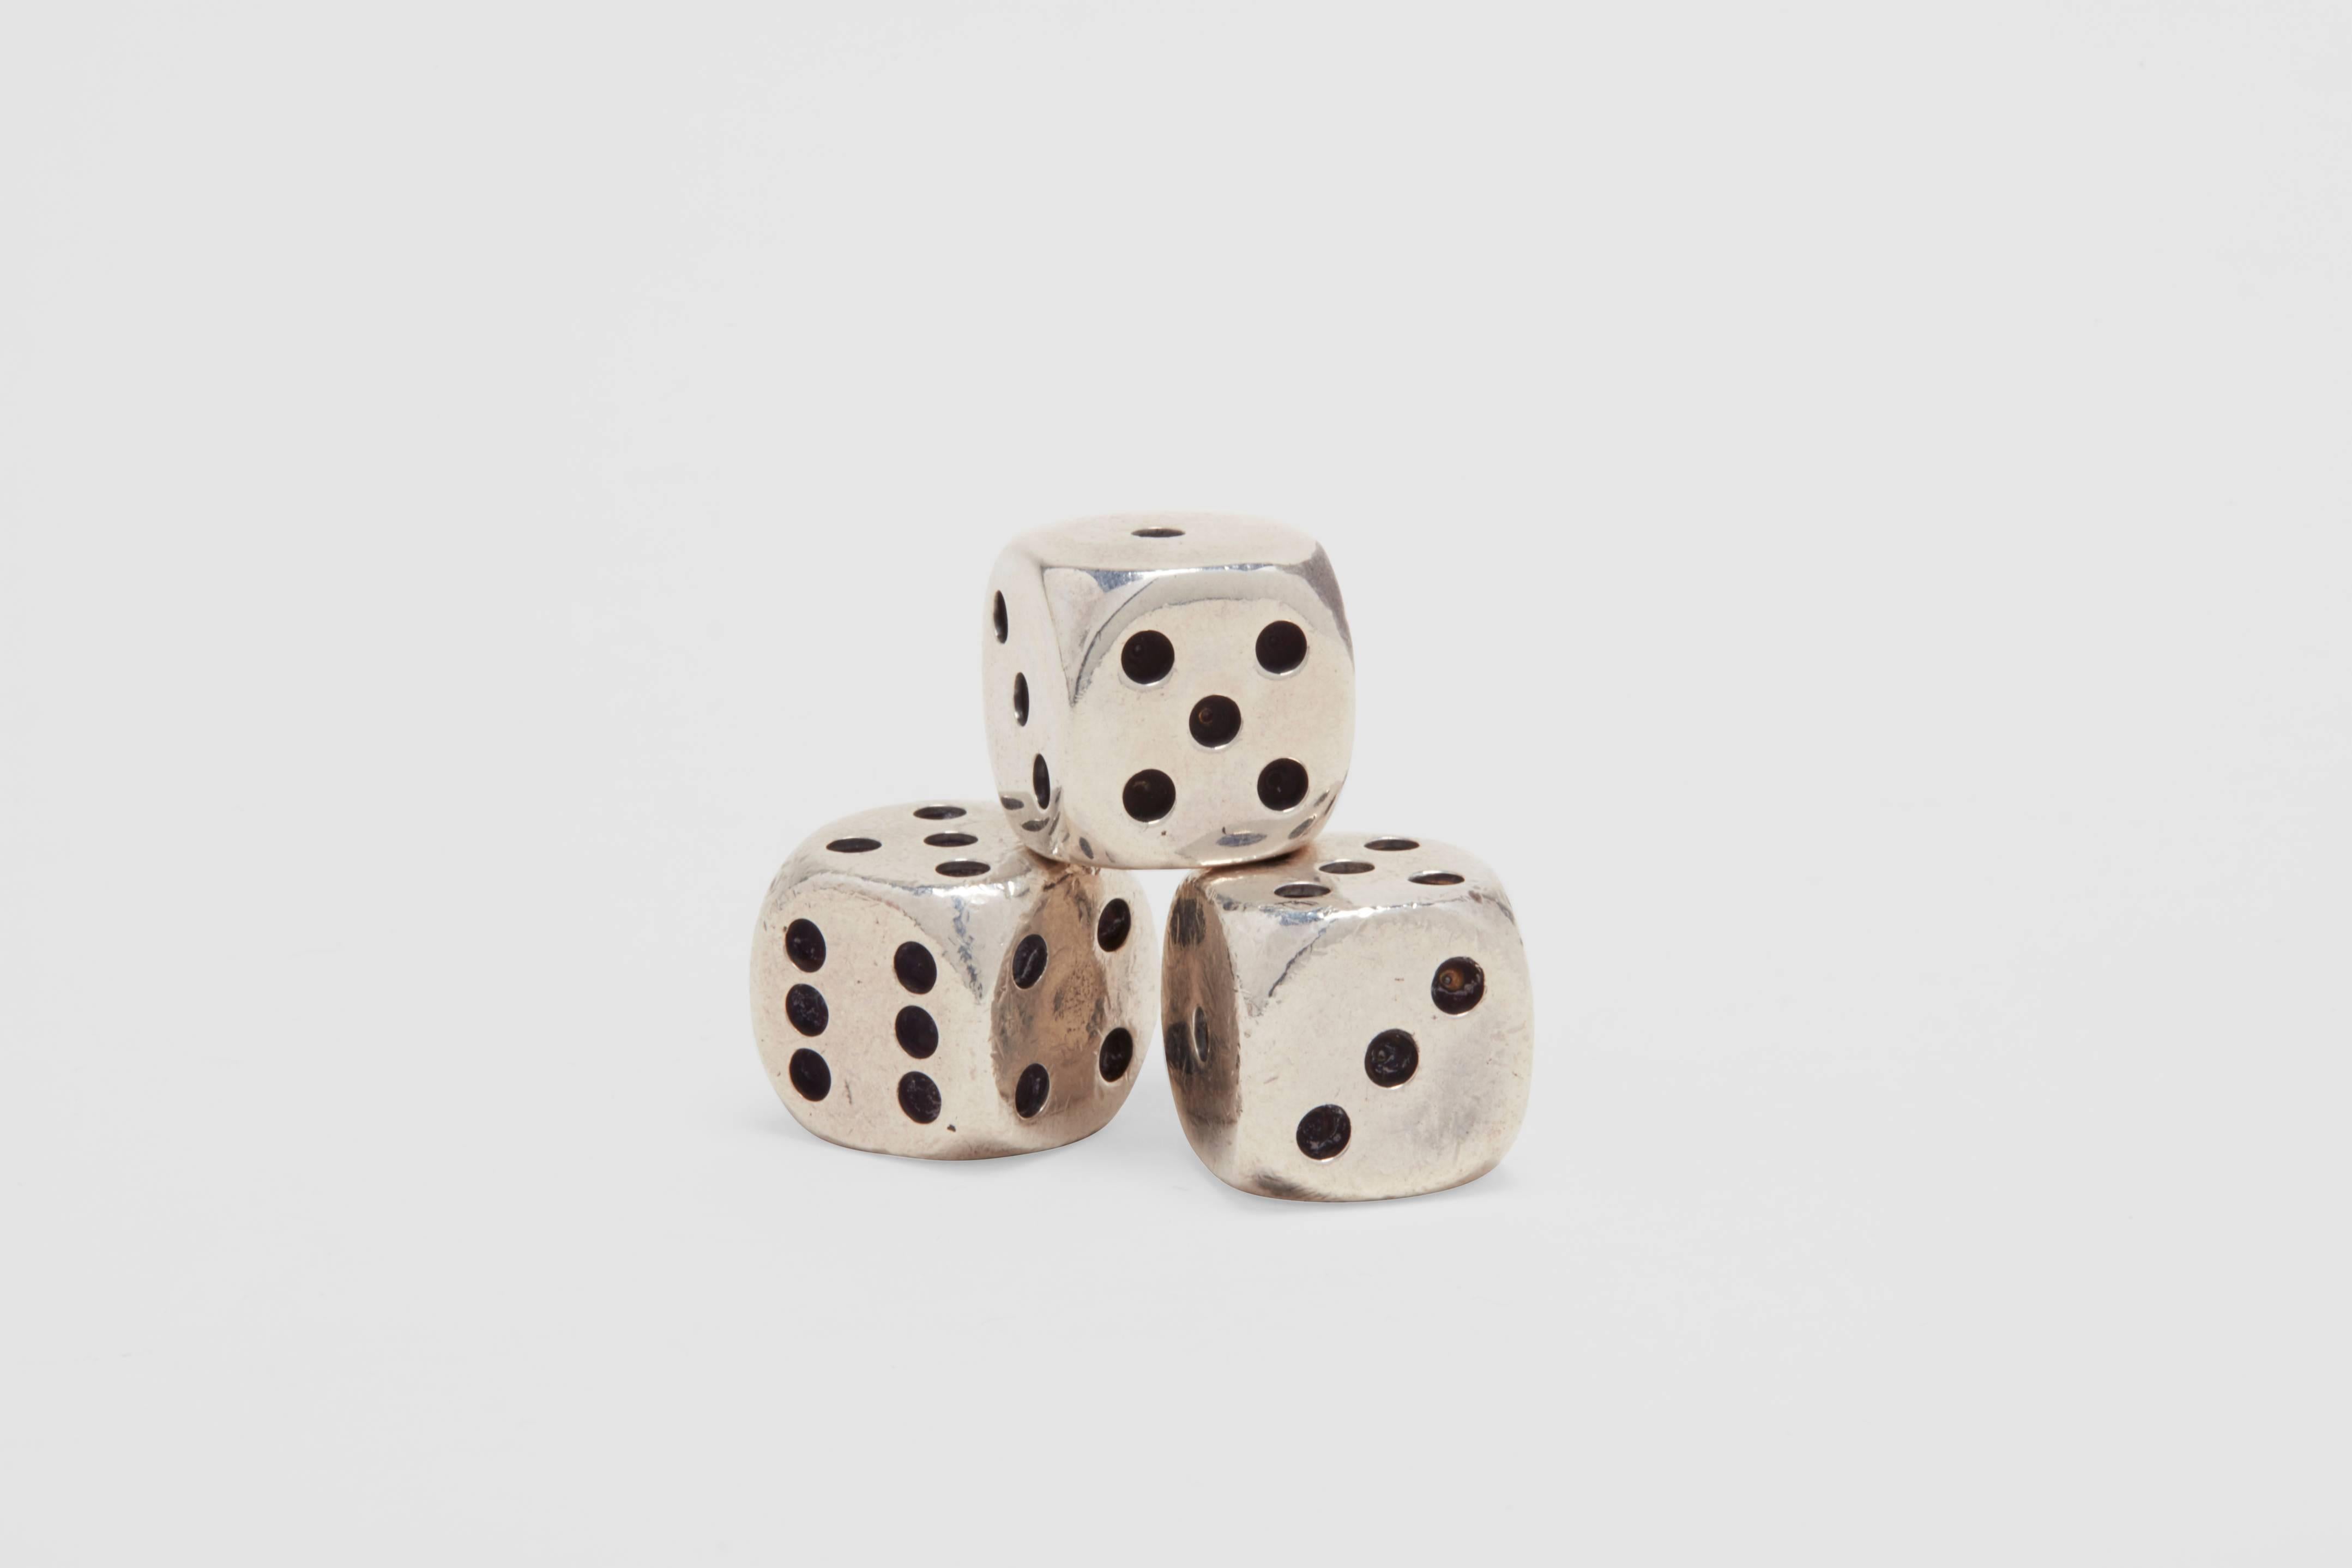 A sterling silver cup and three sterling silver dice. This wonderful set of dice is of the highest quality. The heavy sterling cup is lined with cork in order to not damage either the dice or the cup while shaking, and also to reduce the noise level